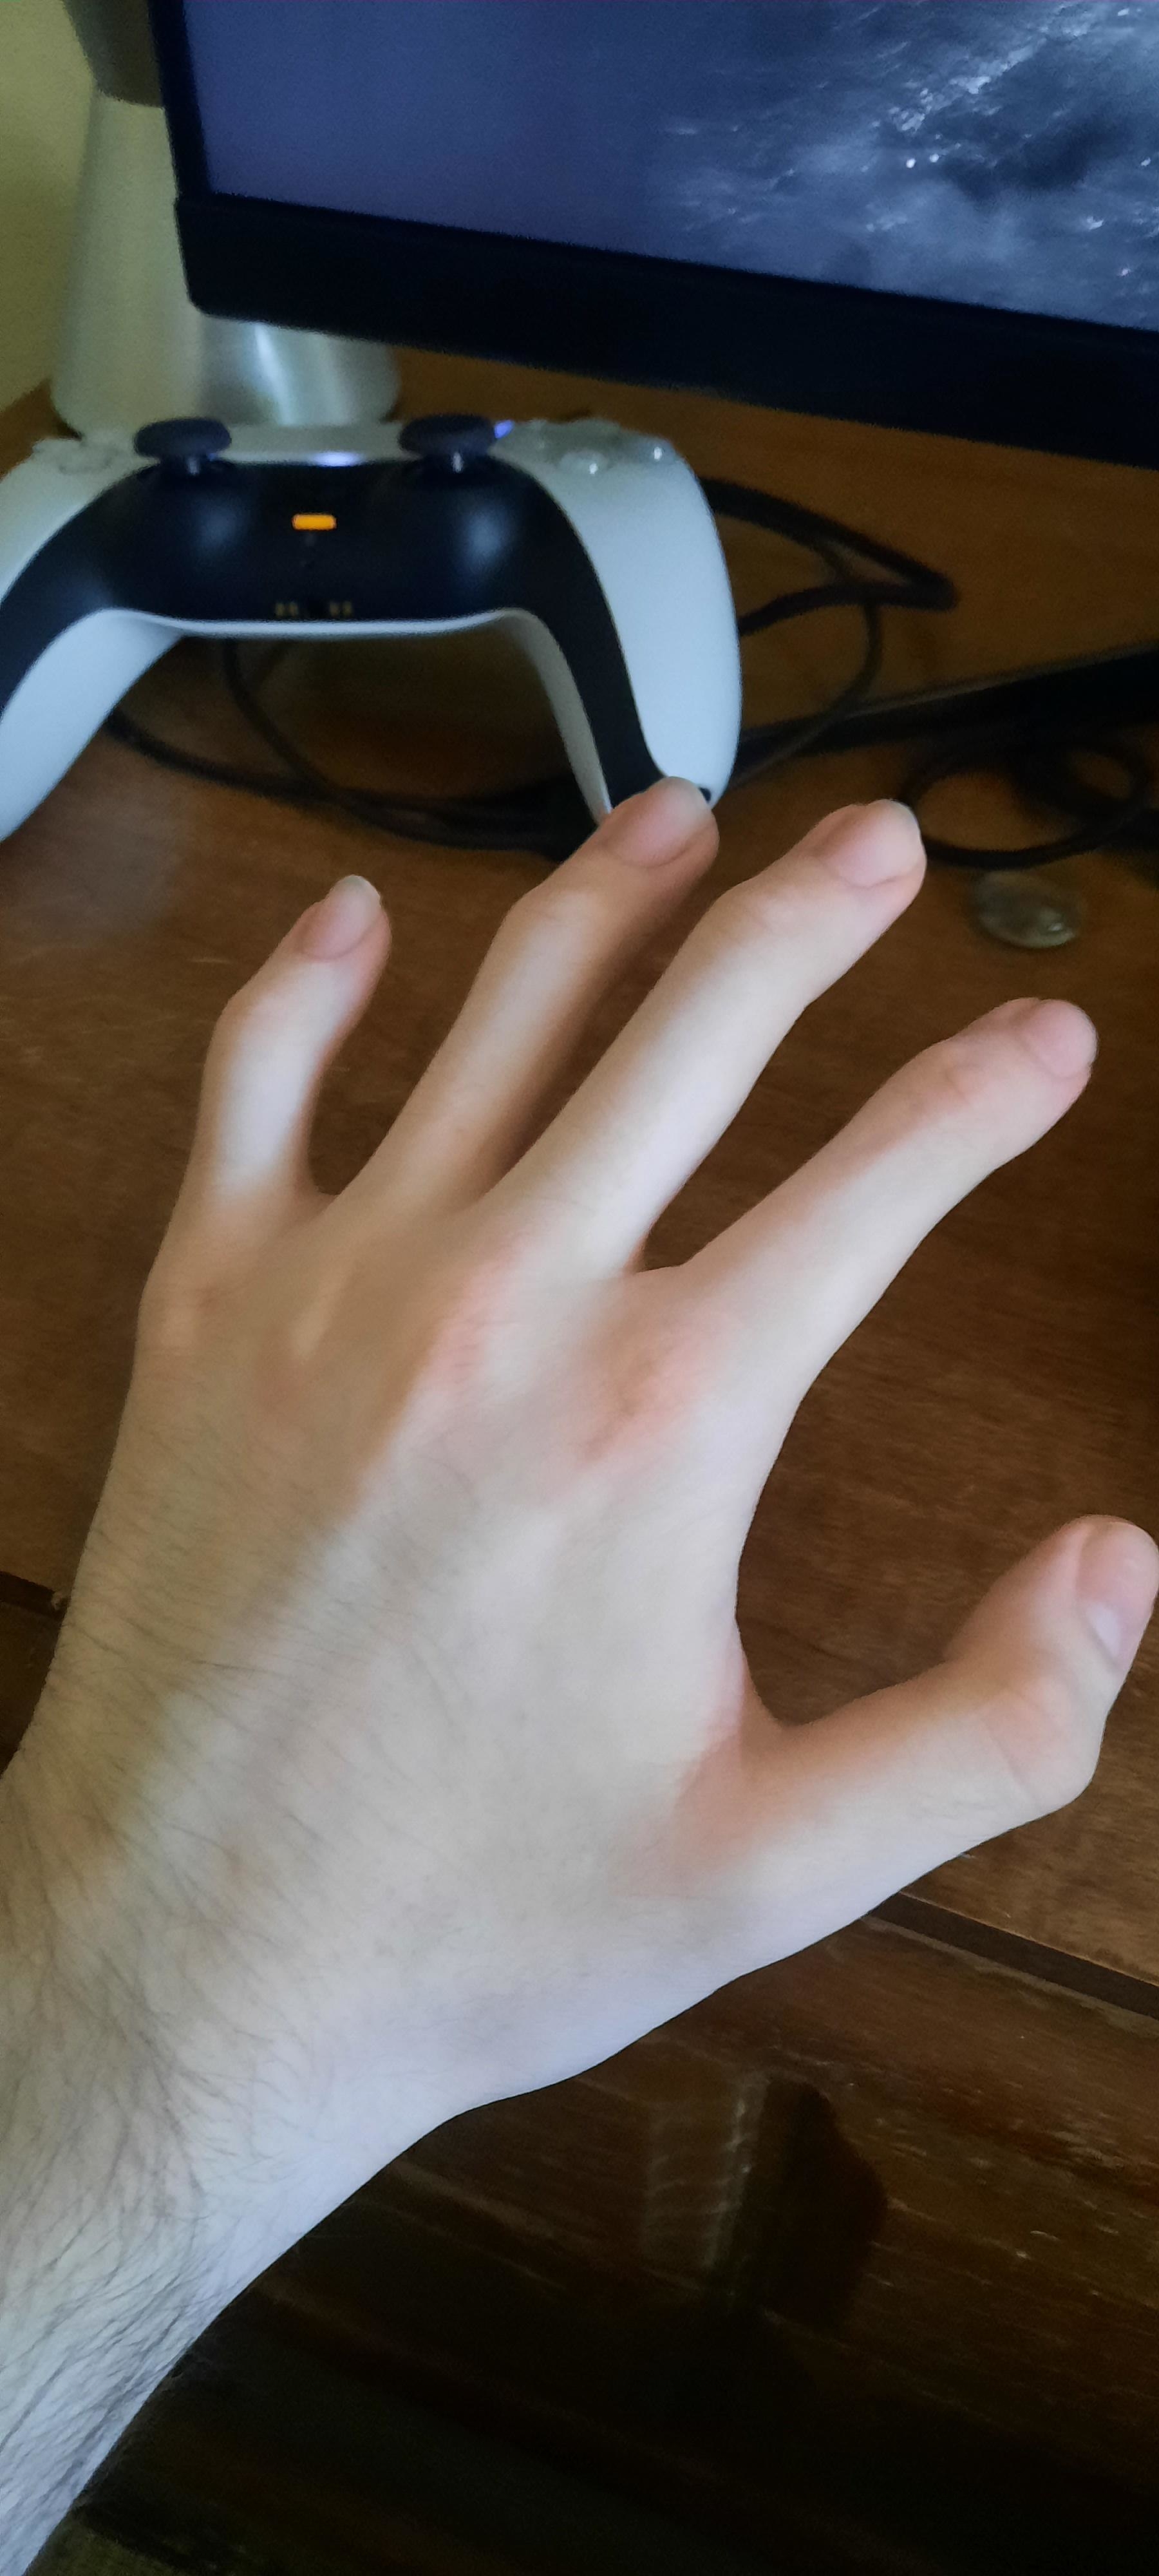 A hand that only has knuckles near the top on each finger